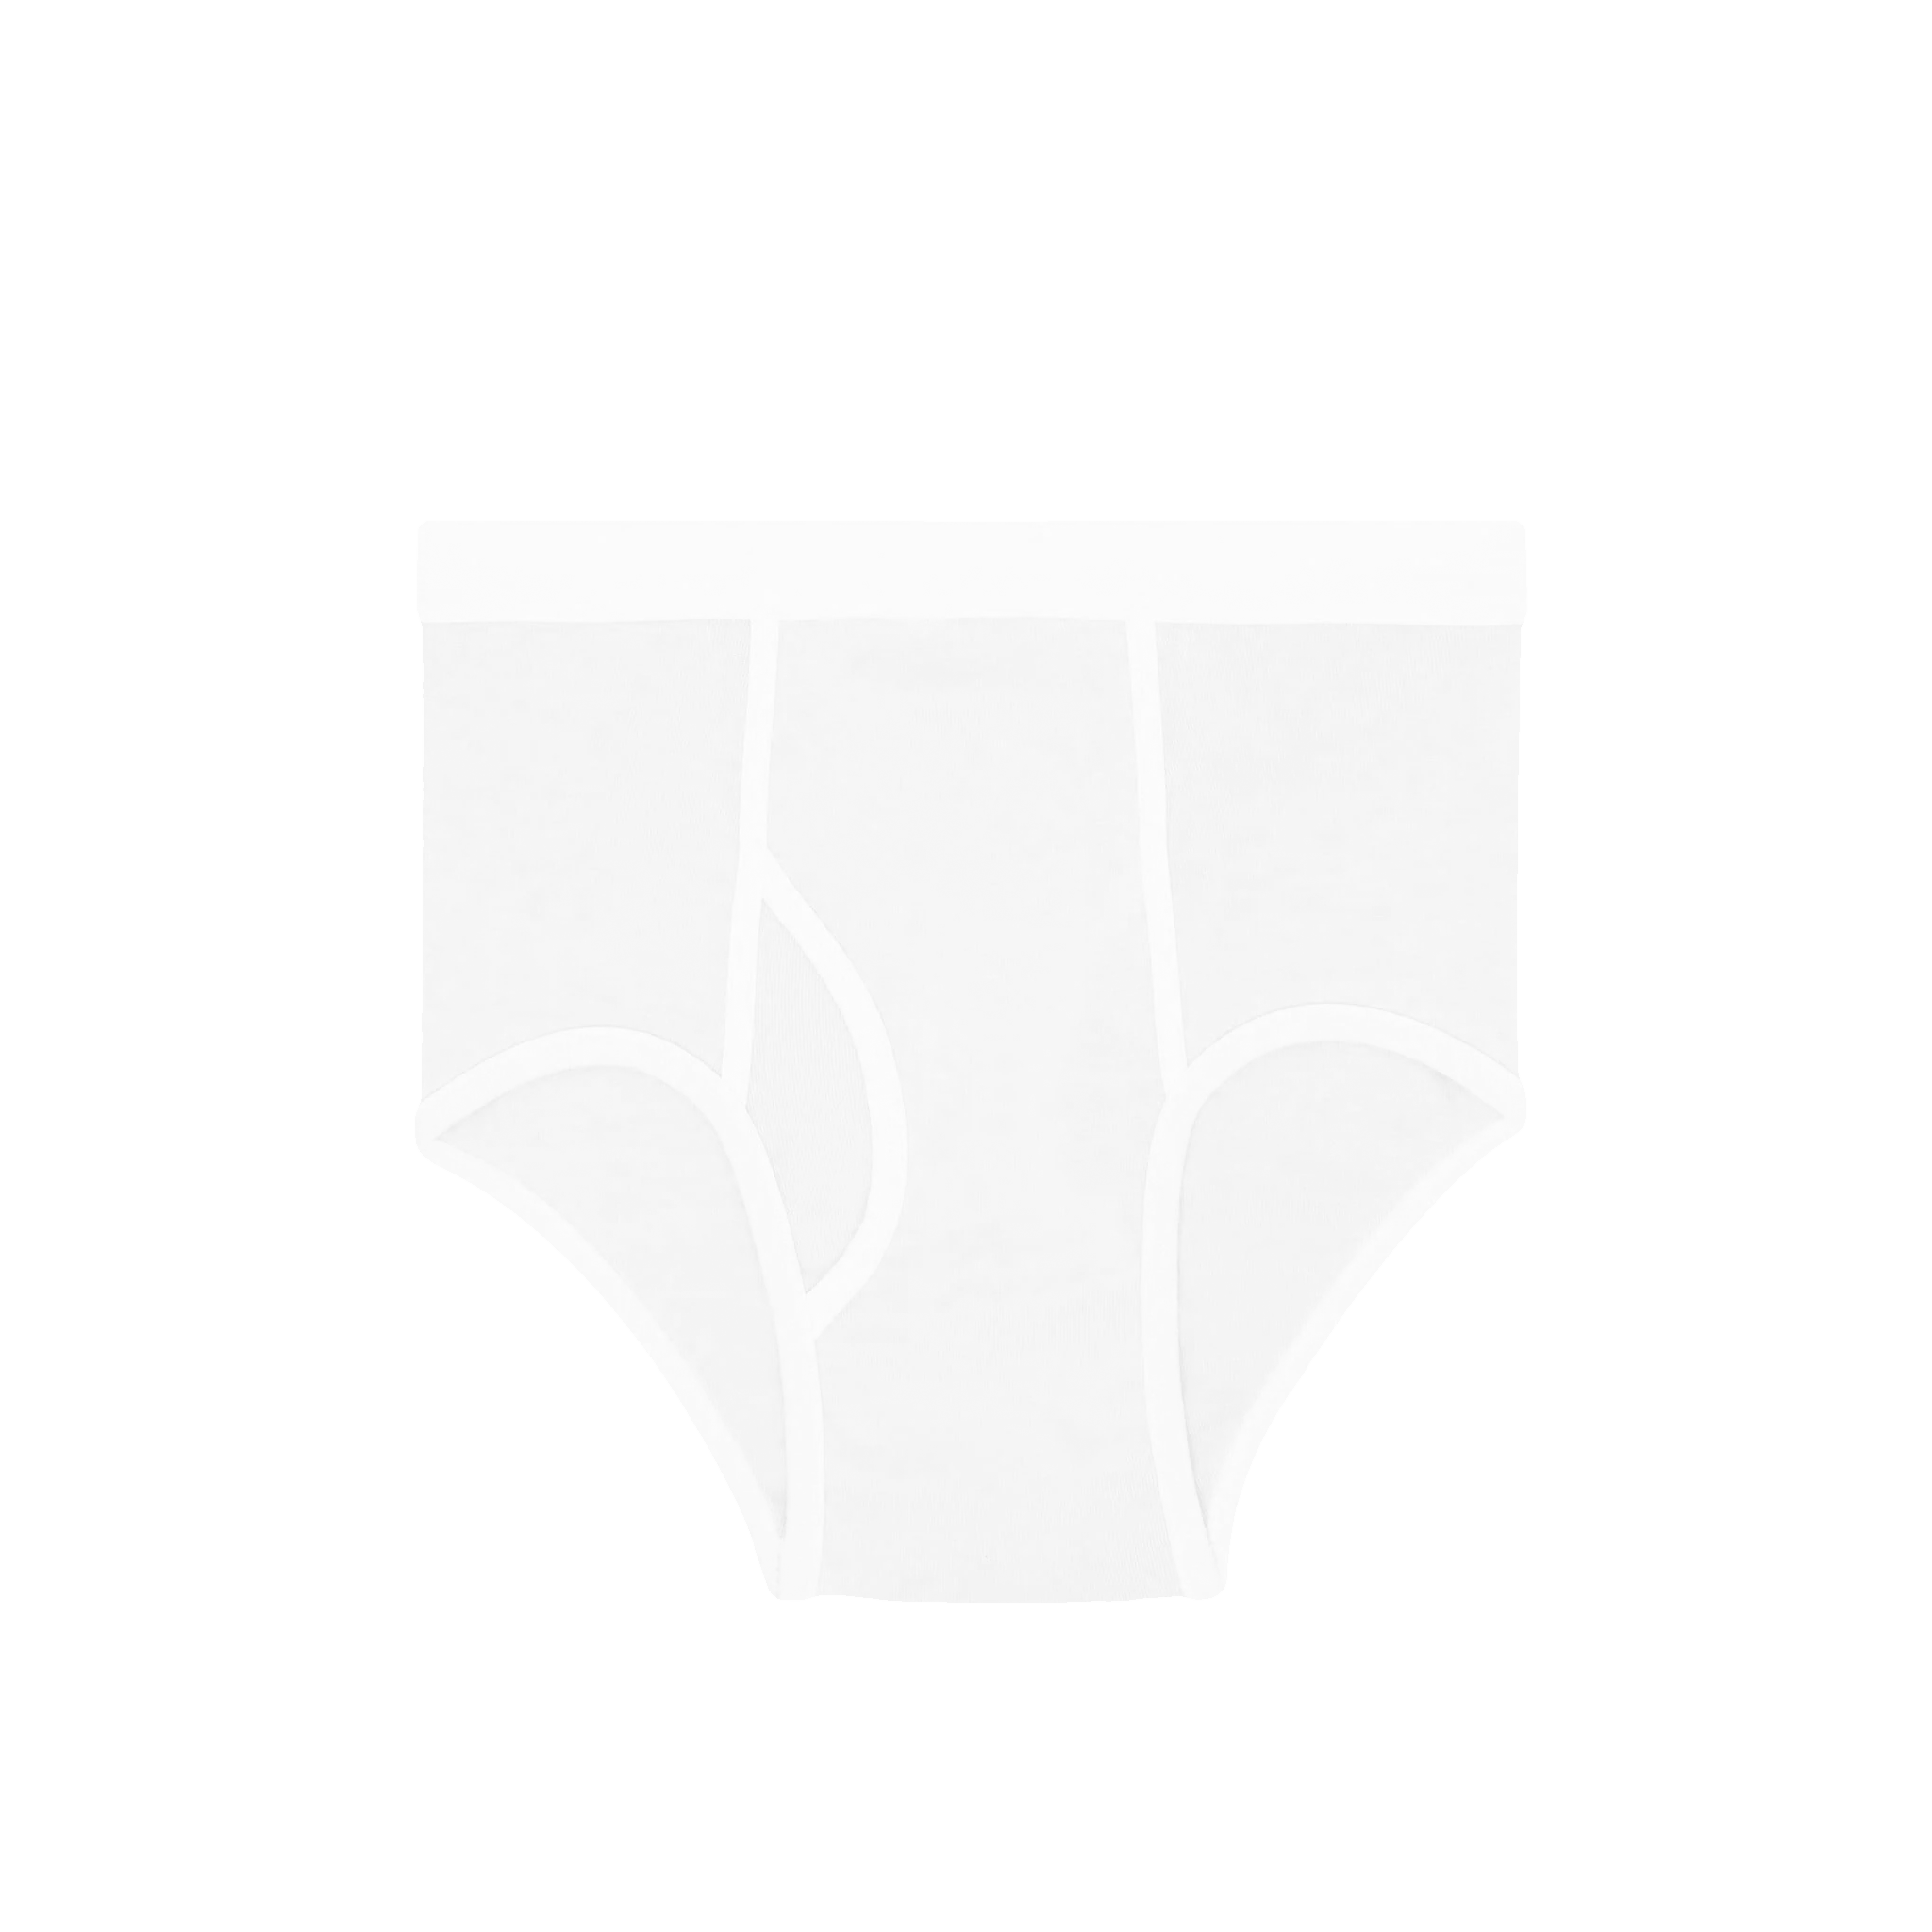 Replying to @linleerhymes this is my favorite brand of underwear. They